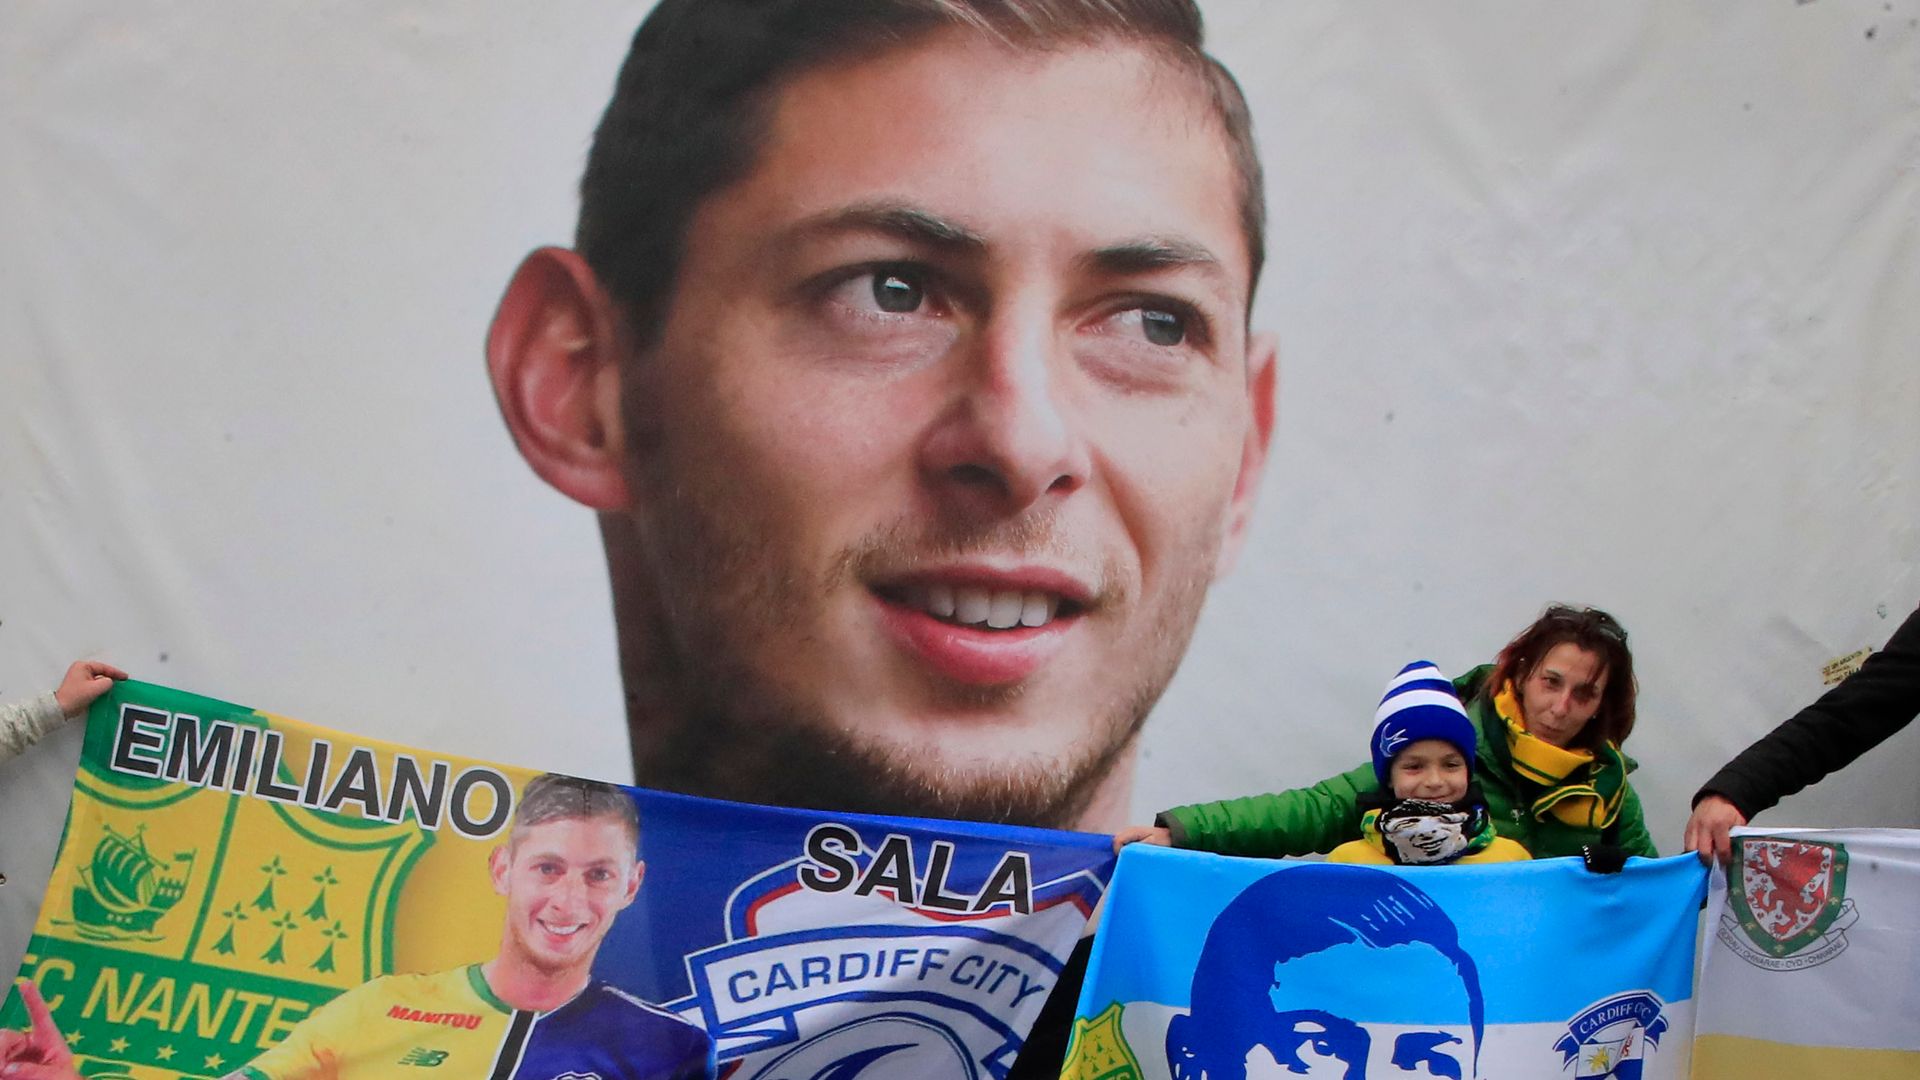 Cardiff reach agreement with McKay on Sala transfer involvement